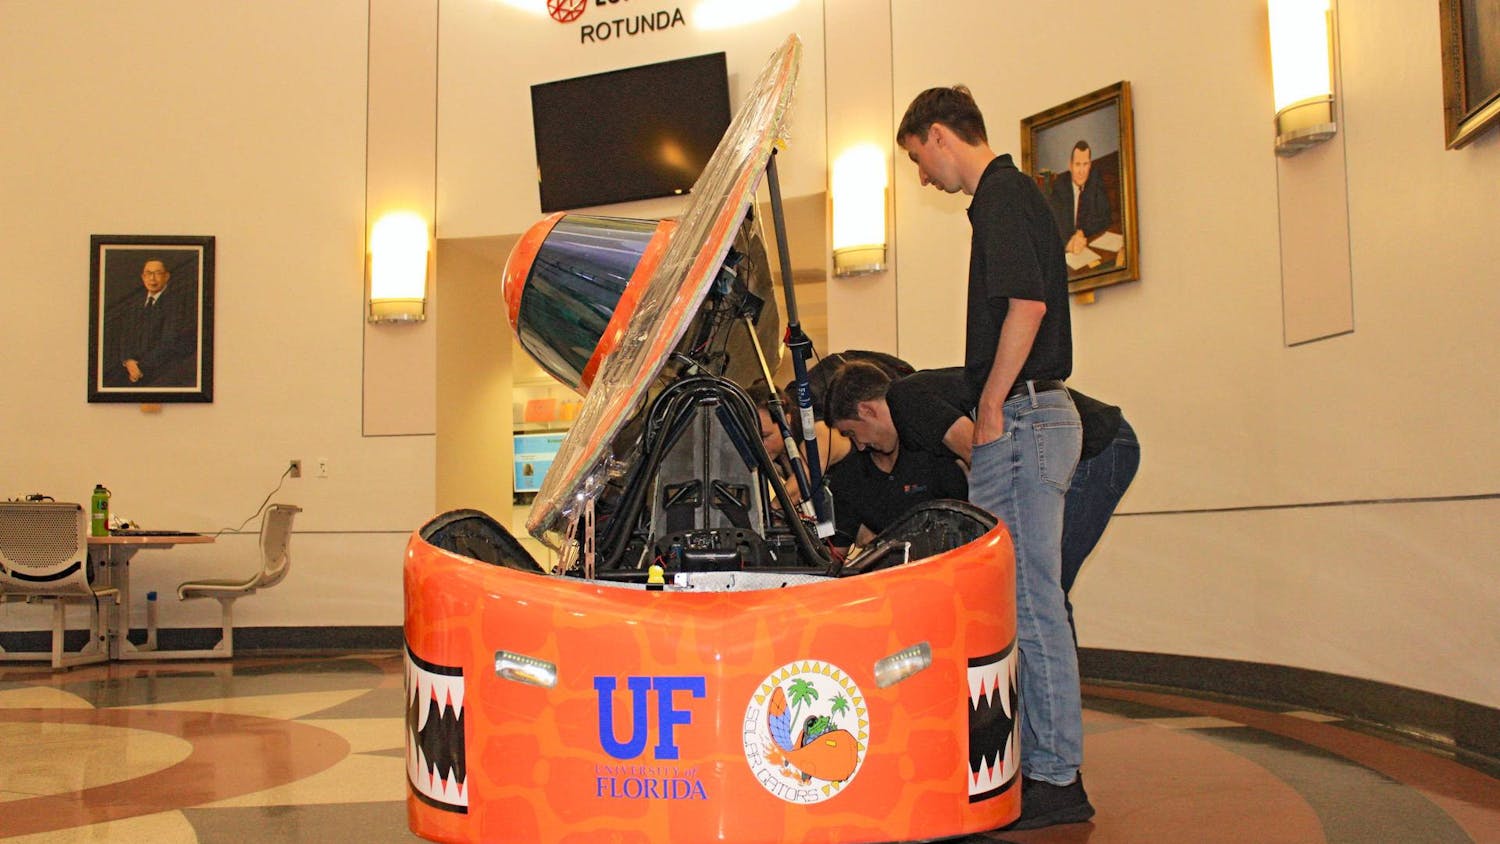 After years of hard work and engineering obstacles, the Solar Gators revealed their newest solar-powered car at UF’s New Engineering Building Thursday. The car is set to compete at the Formula Sun Grand Prix at Topeka, Kansas, throughout the week.&nbsp;
Designed and assembled completely by UF students, the “Sunrider” can reach speeds up to 50 mph, and a single battery pack can power it through 200 miles.&nbsp;
The week-long competition consists of four days of scrutineering, where experts test and inspect every piece of the vehicle, followed by three days of racing. It’s a race of endurance where previous winners reached 700 miles through multiple battery packs. The team will compete against 14 other groups from across the United States and Canada. Irene Chung, president-elect of Solar Gators, said winning this competition will qualify them for larger competitions such as the American Solar Challenge. However, more hurdles await them at the racetrack, she said.&nbsp;
“As you start driving,” she said, “you start seeing things that you’ve never seen before, and you’ve got to debug and problem solve on the fly.”